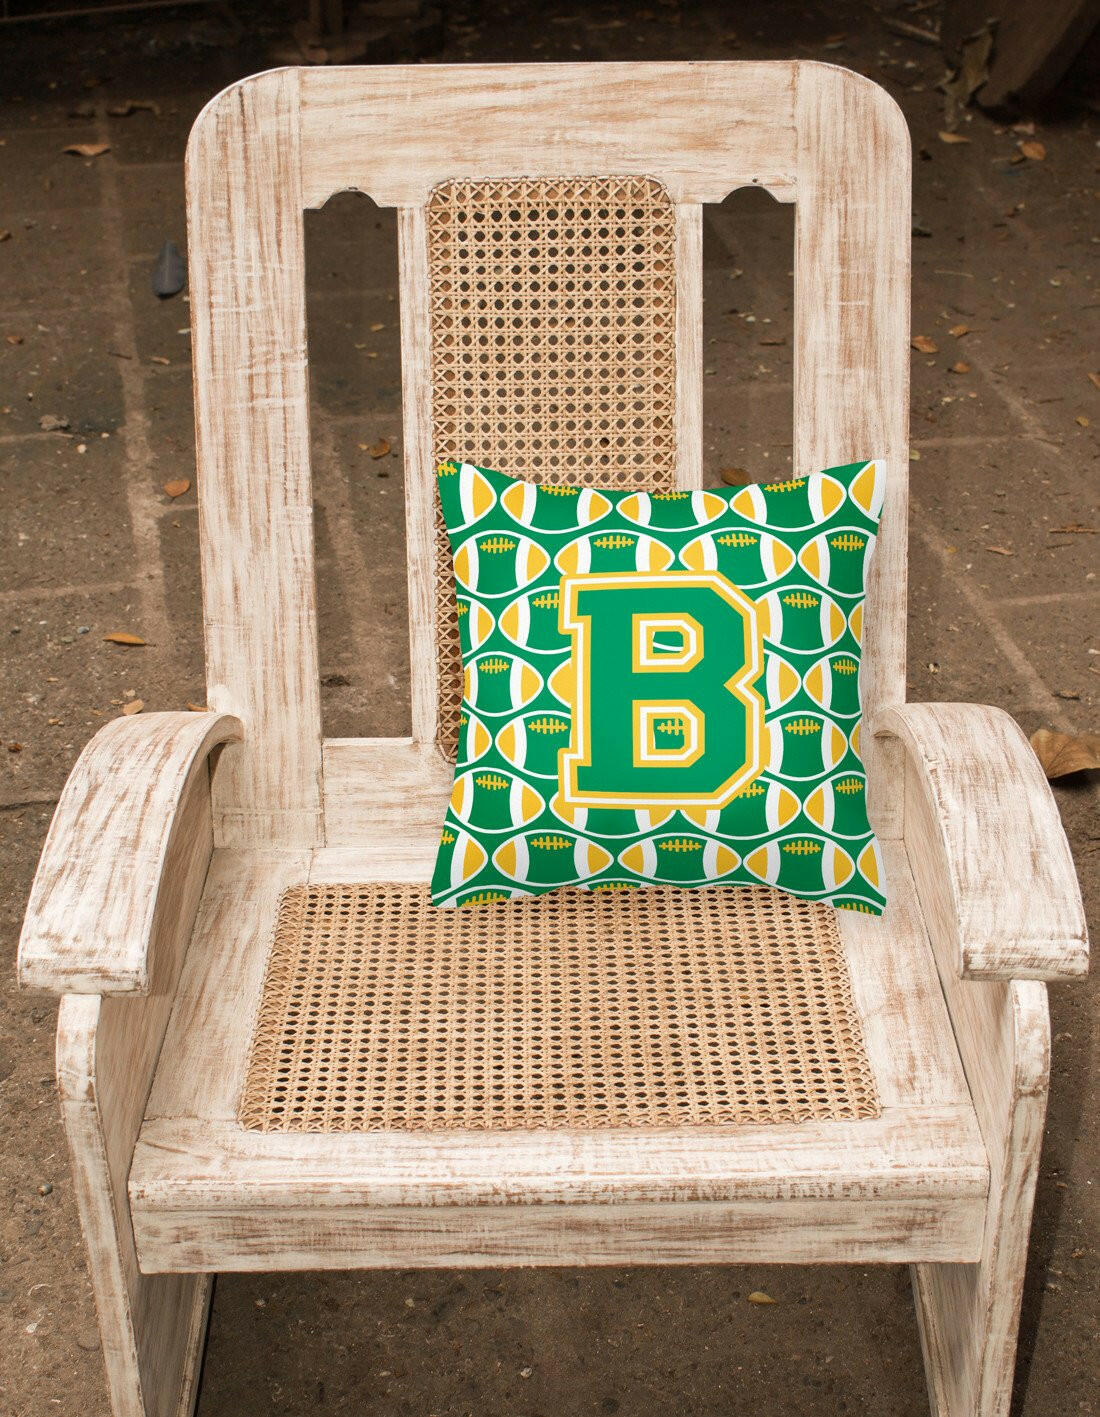 Letter B Football Green and Gold Fabric Decorative Pillow CJ1069-BPW1414 by Caroline's Treasures